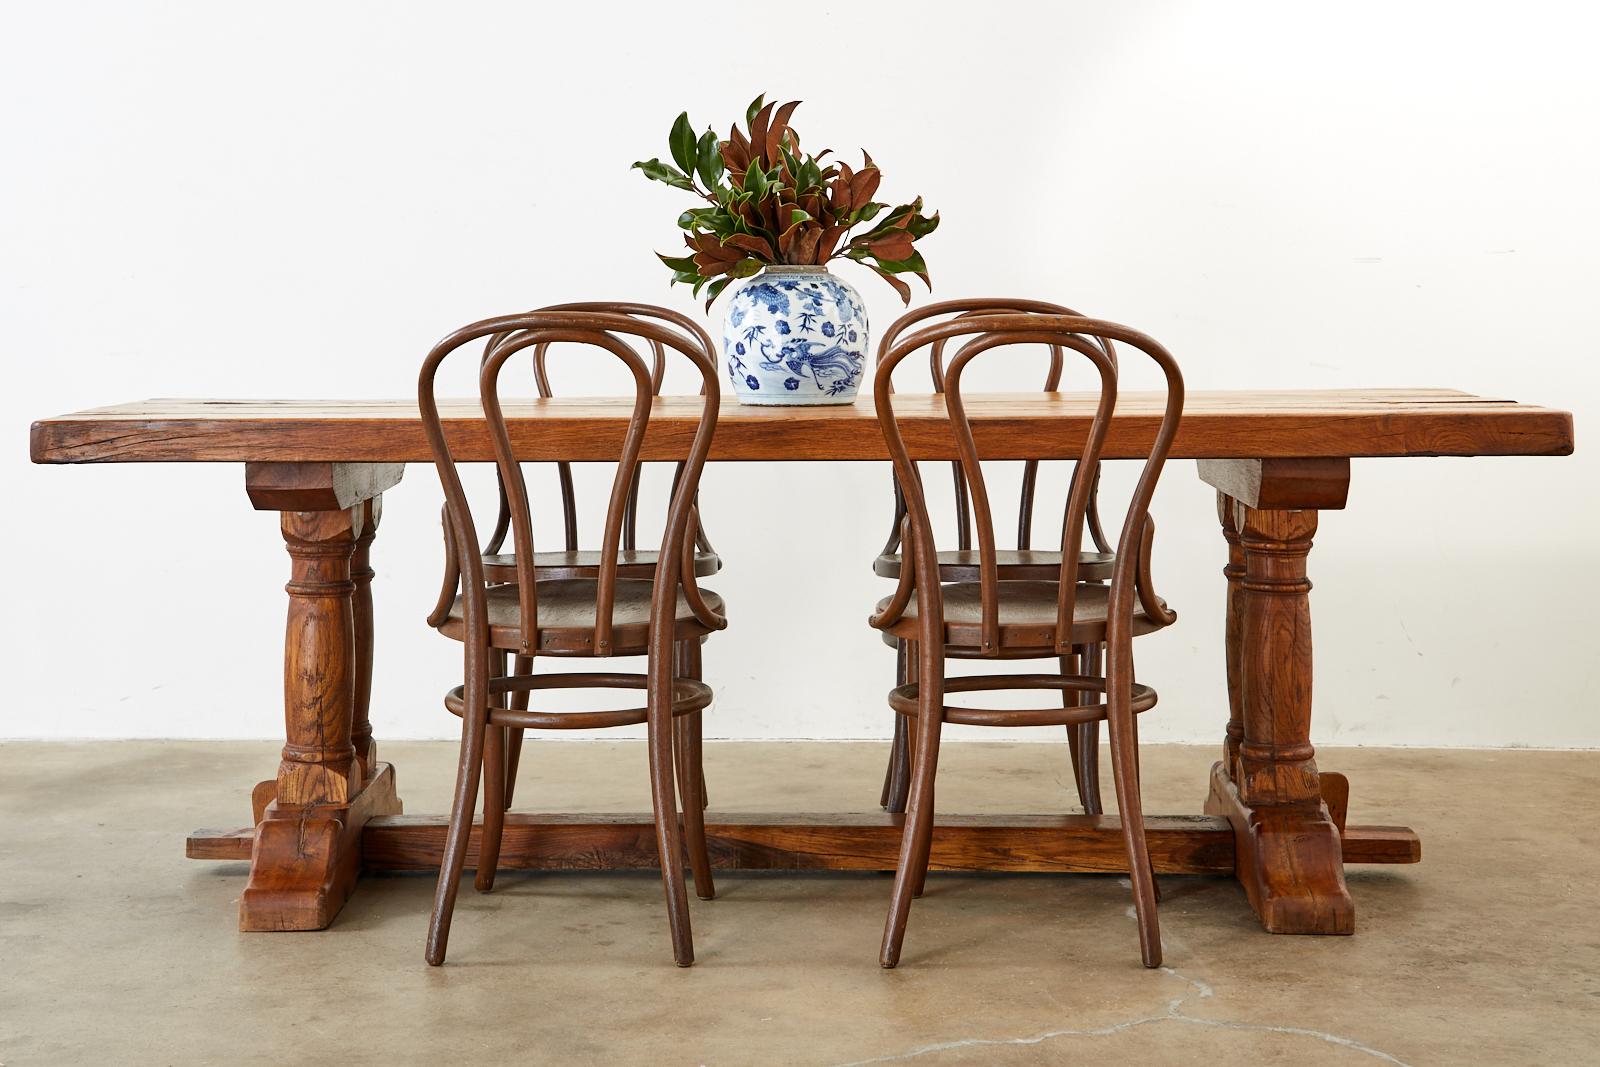 Rustic Country French farmhouse dining table featuring massive planks or reclaimed oak. The top measures 2.5 inches thick showcasing the antique wood grains and age. Supported by a massive trestle style base featuring thick column turned legs ending